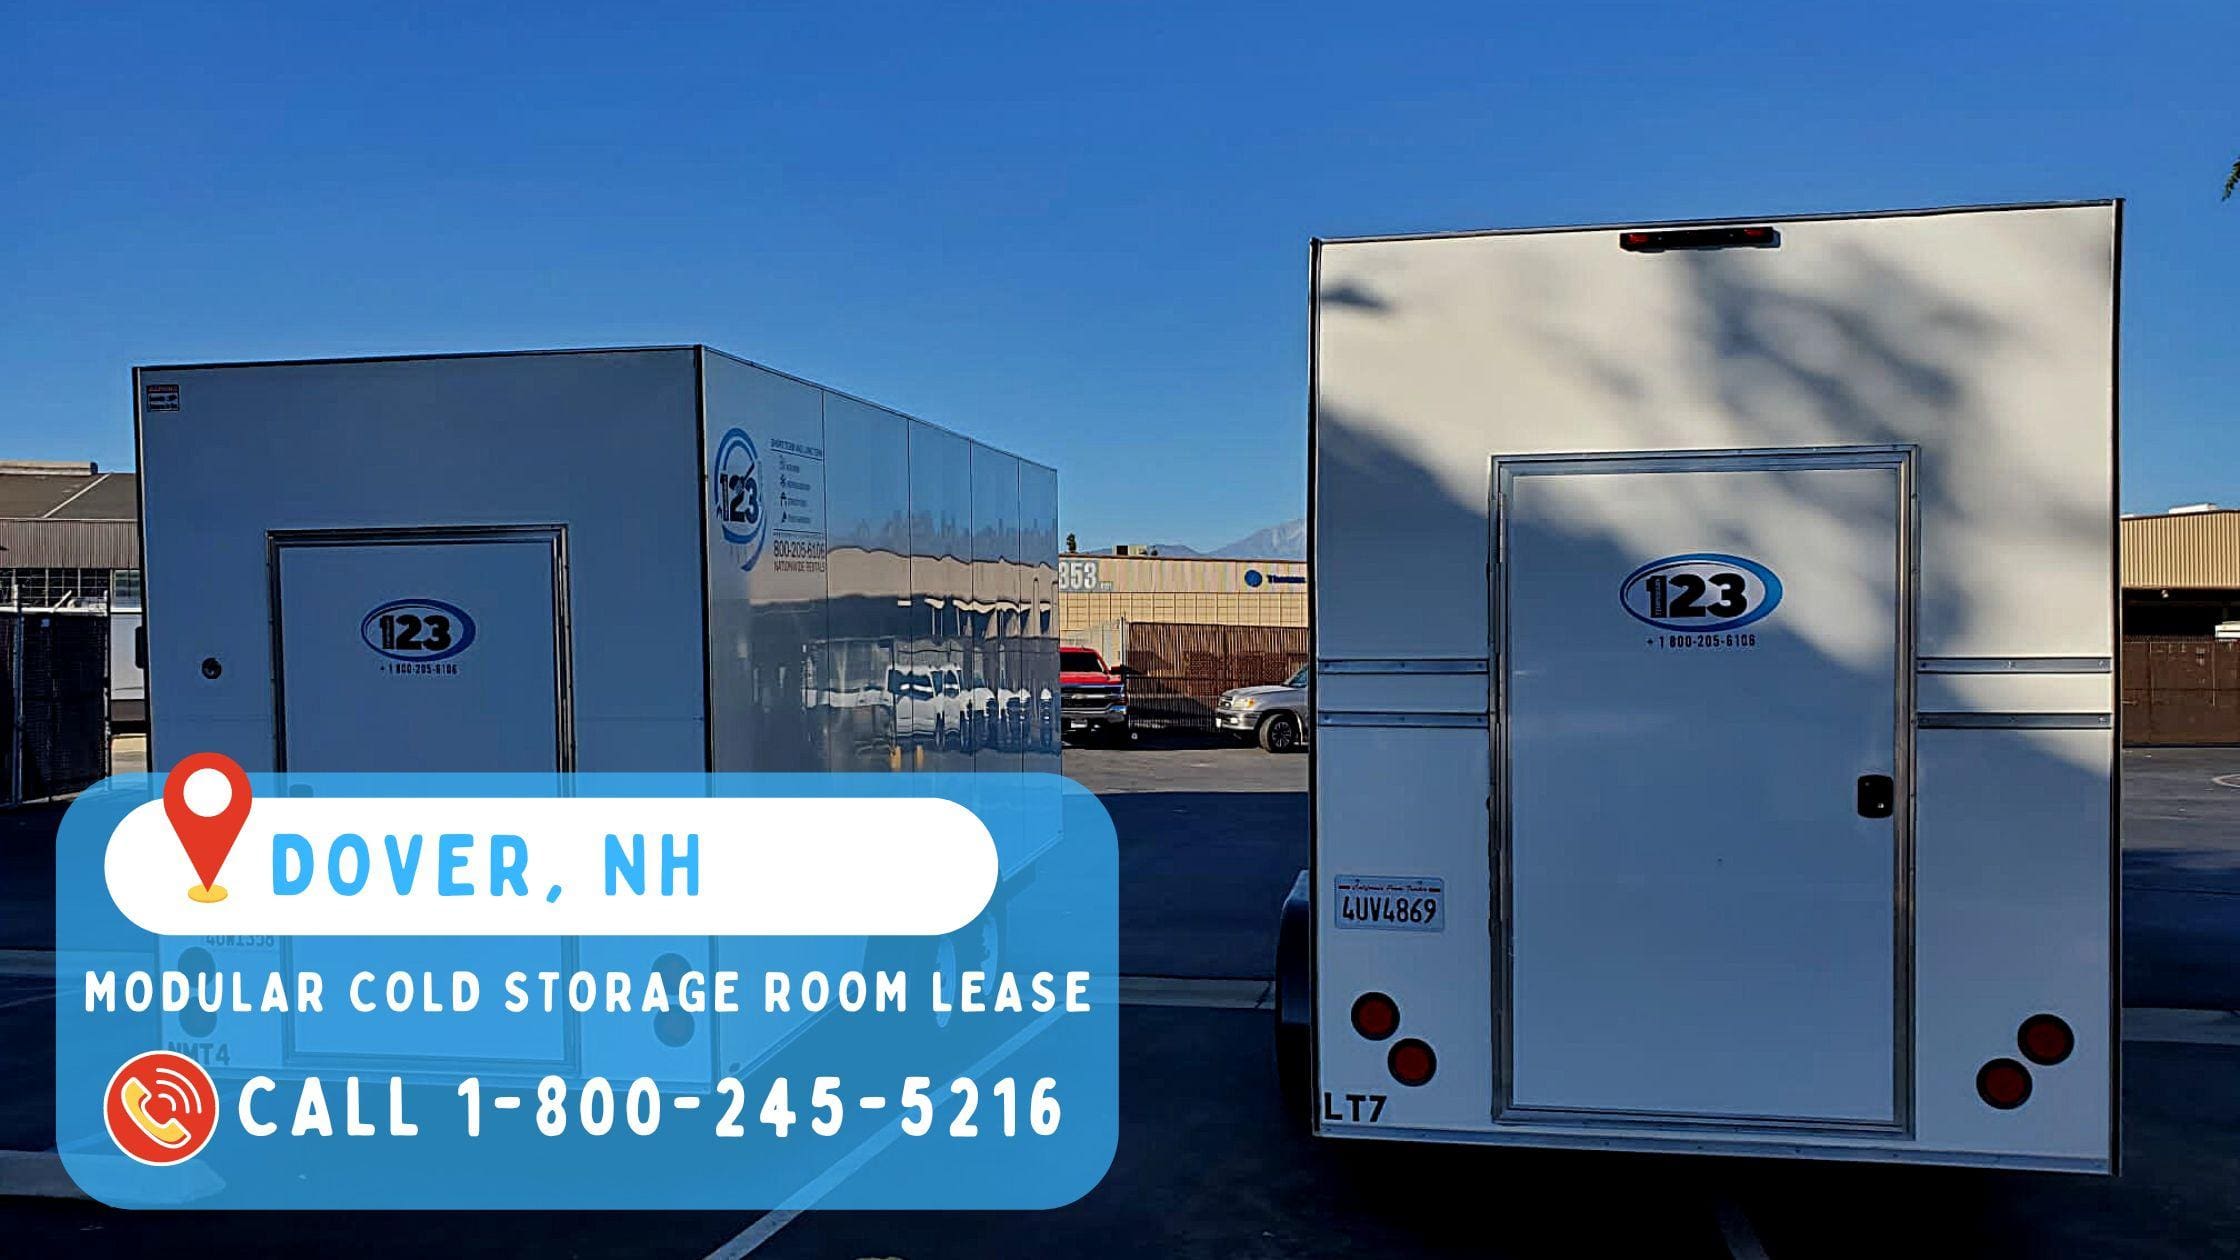 Modular Cold Storage Room Lease in Dover